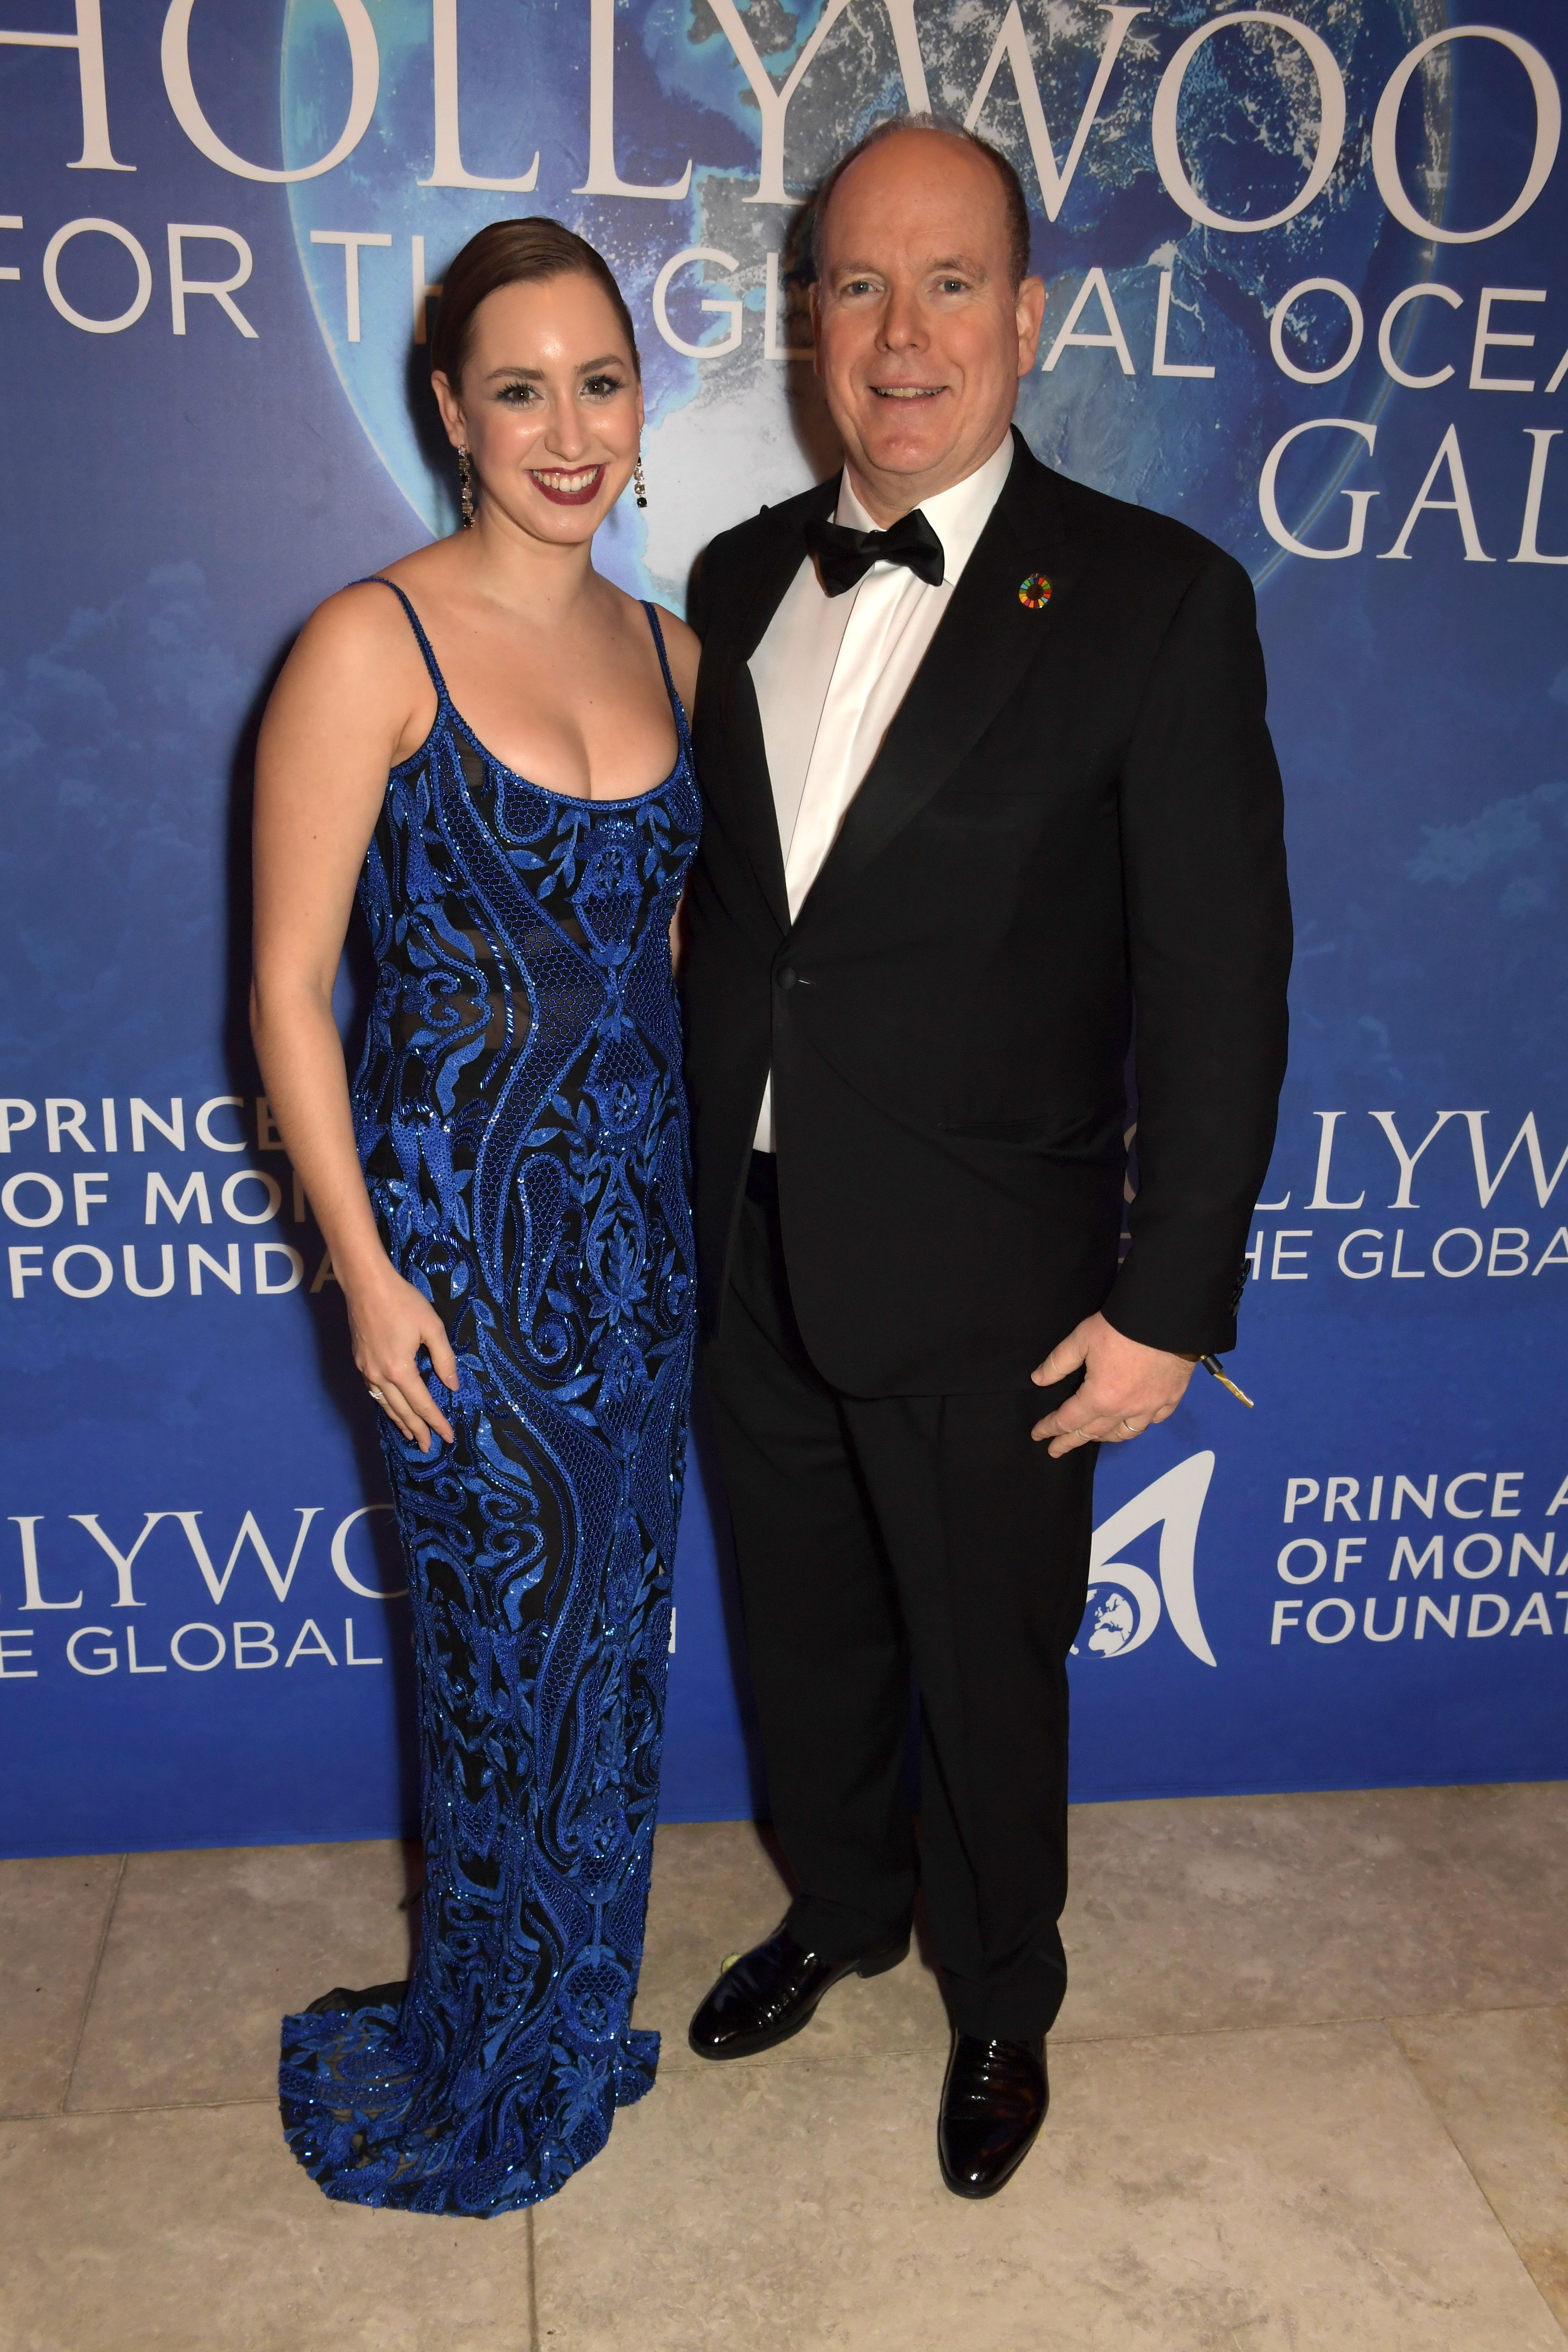 Jazmin Grace Grimaldi and Prince Albert II of Monaco at the 2020 Hollywood For The Global Ocean Gala honoring HSH Prince Albert II of Monaco at Palazzo di Amore on February 06, 2020 in Beverly Hills, California. | Source: Getty Images